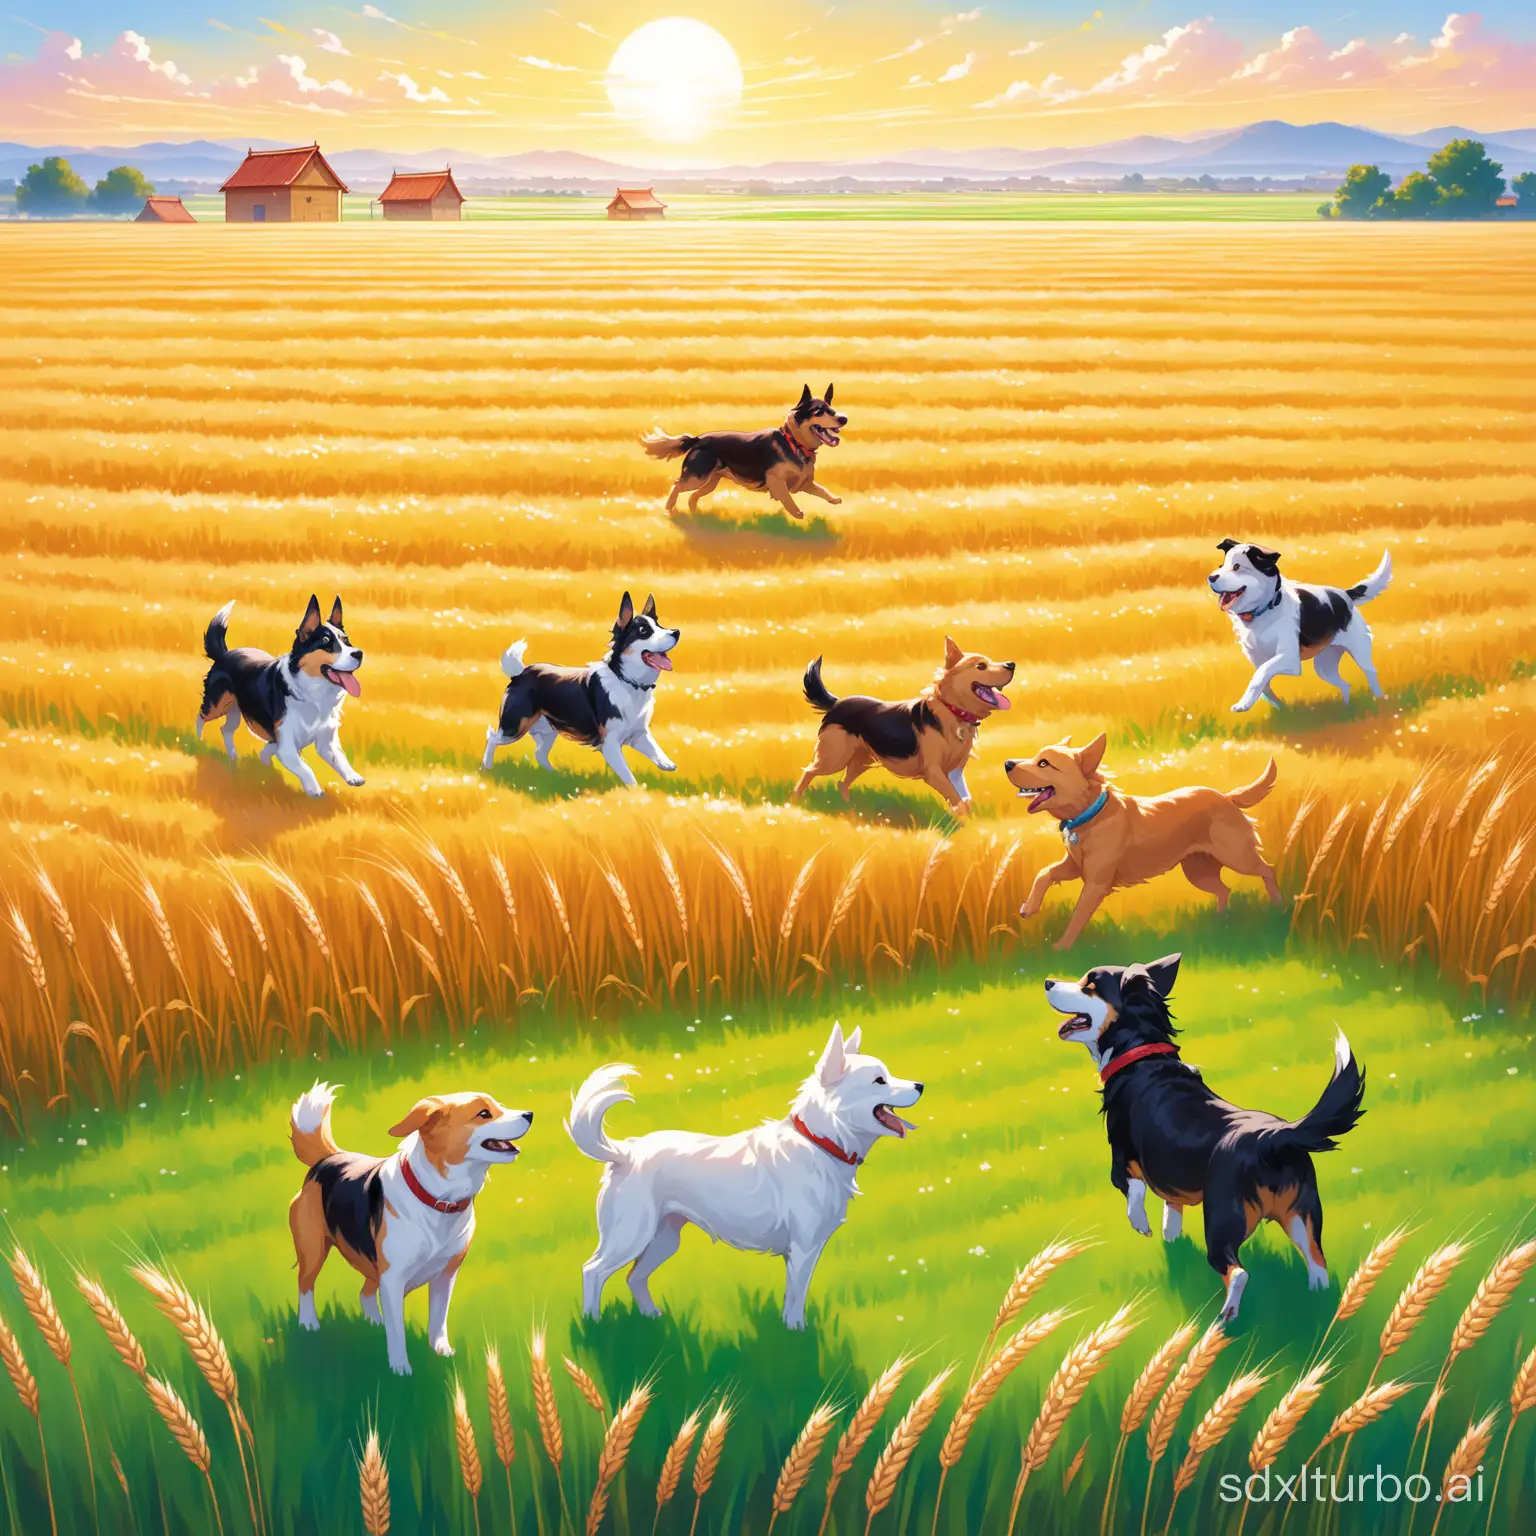 Seven or eight dogs of different breeds are happily playing in the small garden, with endless wheat fields in the distance.